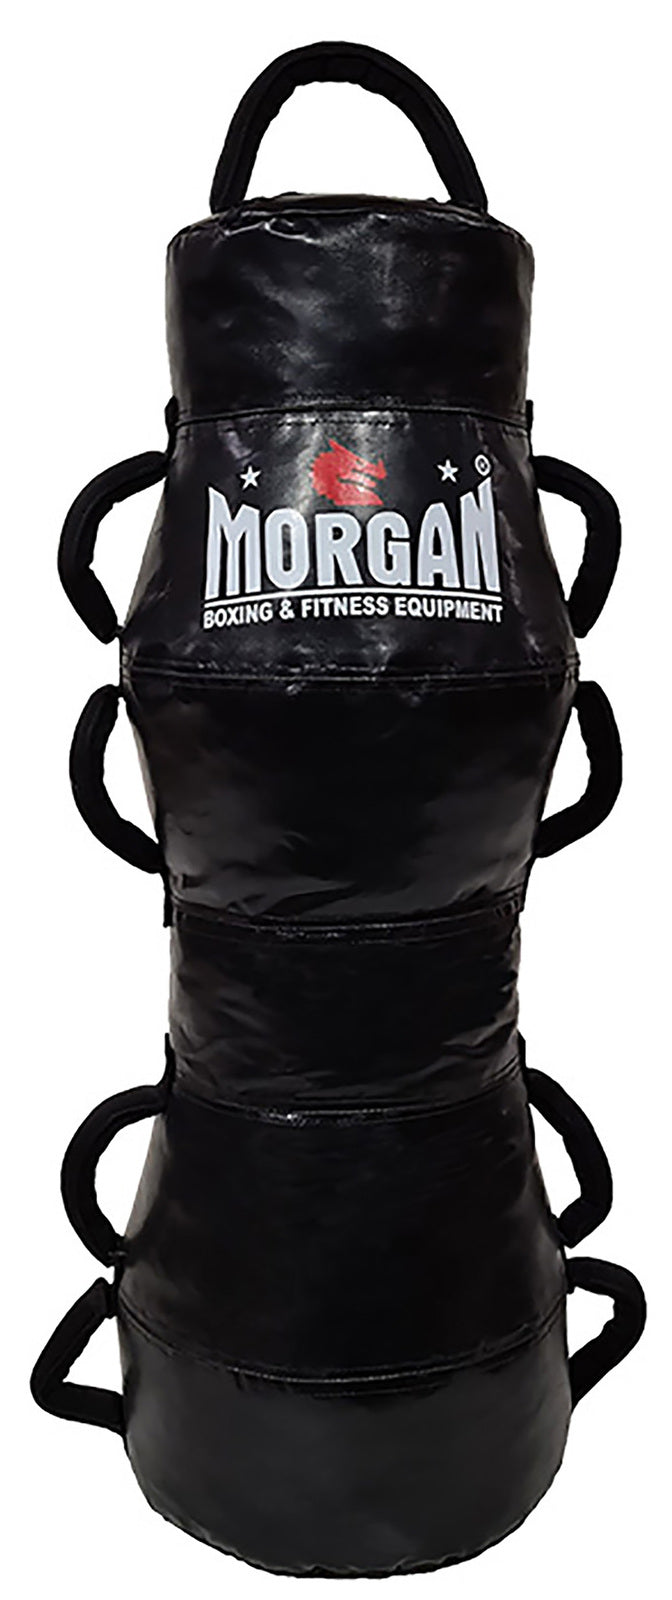 The Fitness Hero Cardio Cage fit bag from Morgan Sports is designed to be used as an all-out ground and pound bag, cardio fitness training bag. Most commonly used in MMA style cardio training classes. Made using 950D rip stop vinyl and filled in Australia using premium rags 